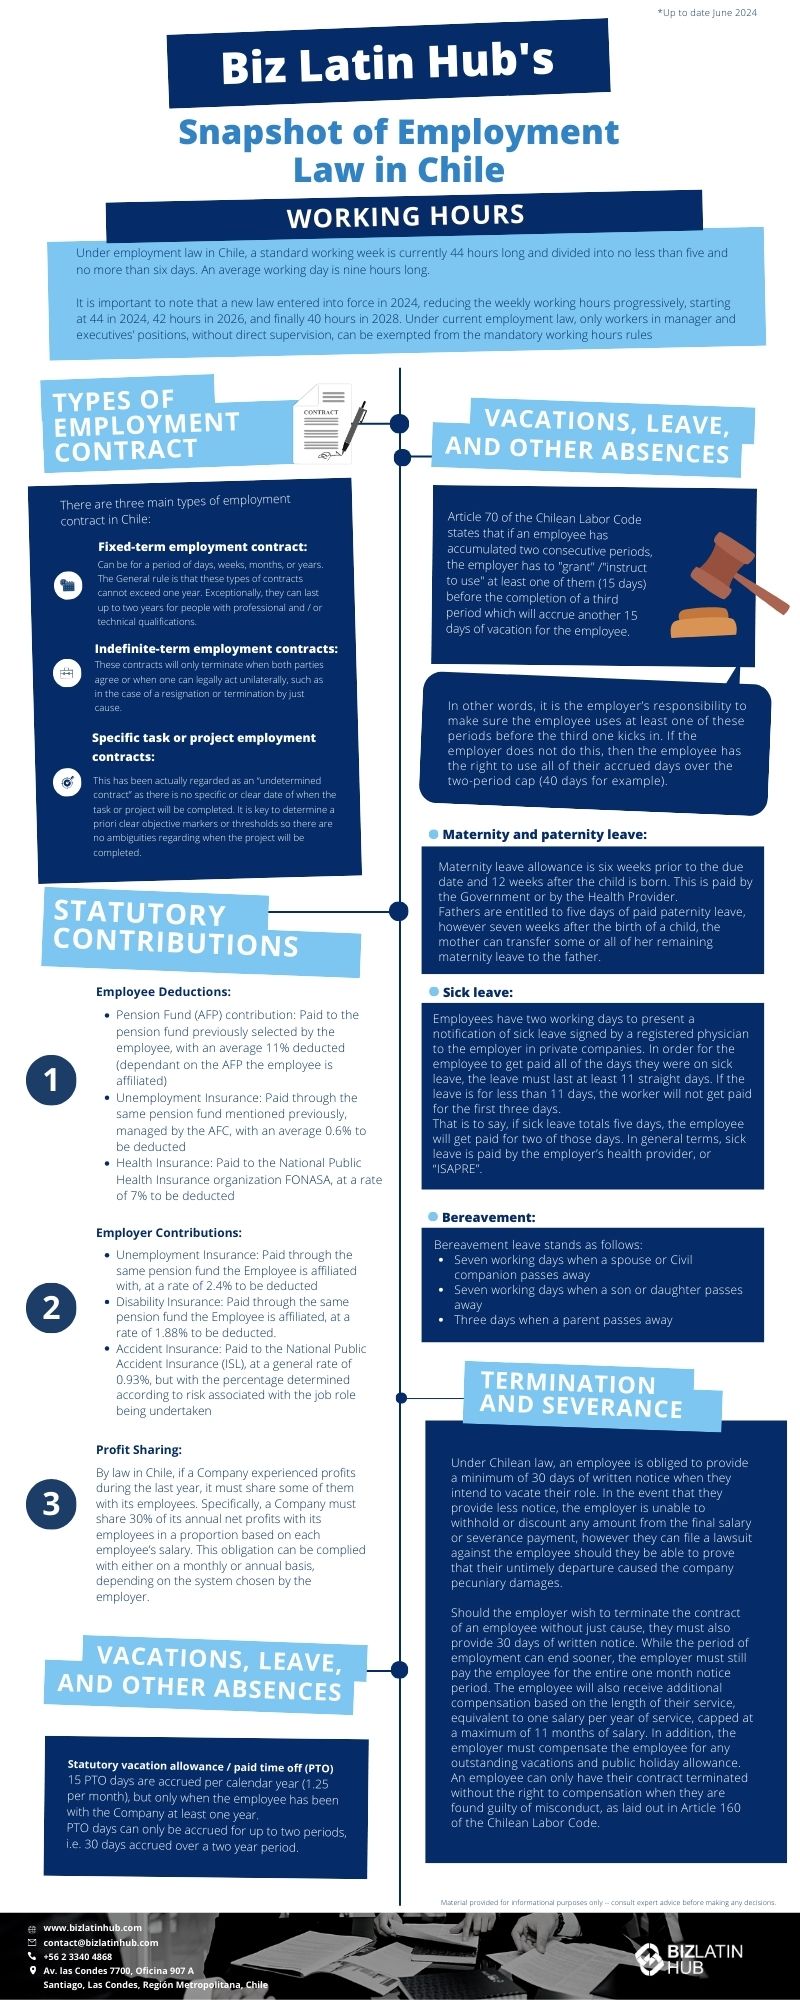 Infographic titled "Biz Latin Hub's Snapshot of Employment Law in Chile." Sections include Types of Employment Contracts, Statutory Contributions, Vacations, Leave and Other Absences, Worker Rights, and Termination and Severance. Contains detailed text and icons for a comprehensive overview of employment law in Chile.